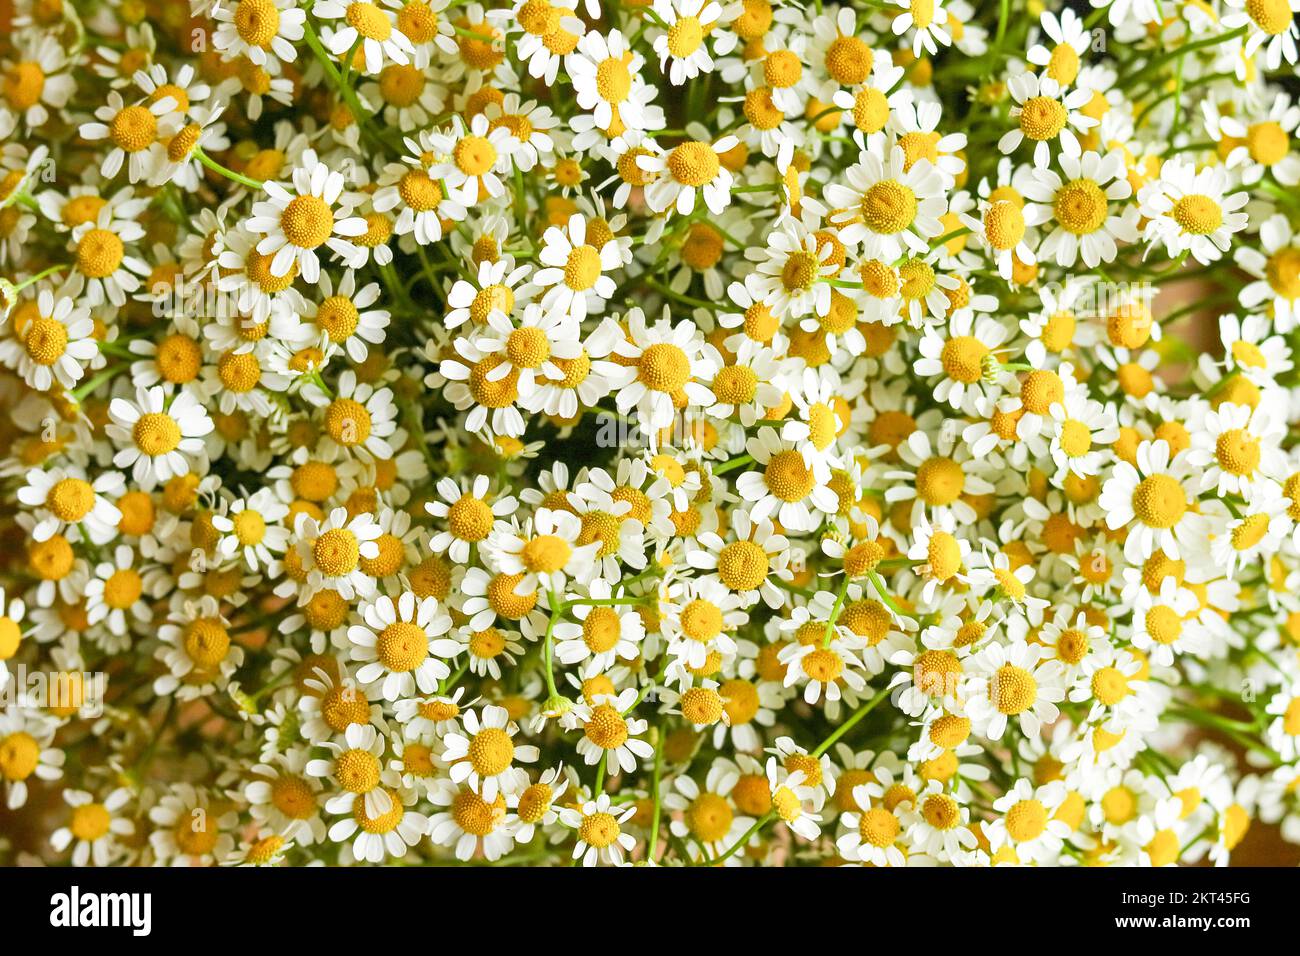 Small chamomile feverfew daisy Tanacetum parthenium flowers bouquet full frame top view flat lay Stock Photo